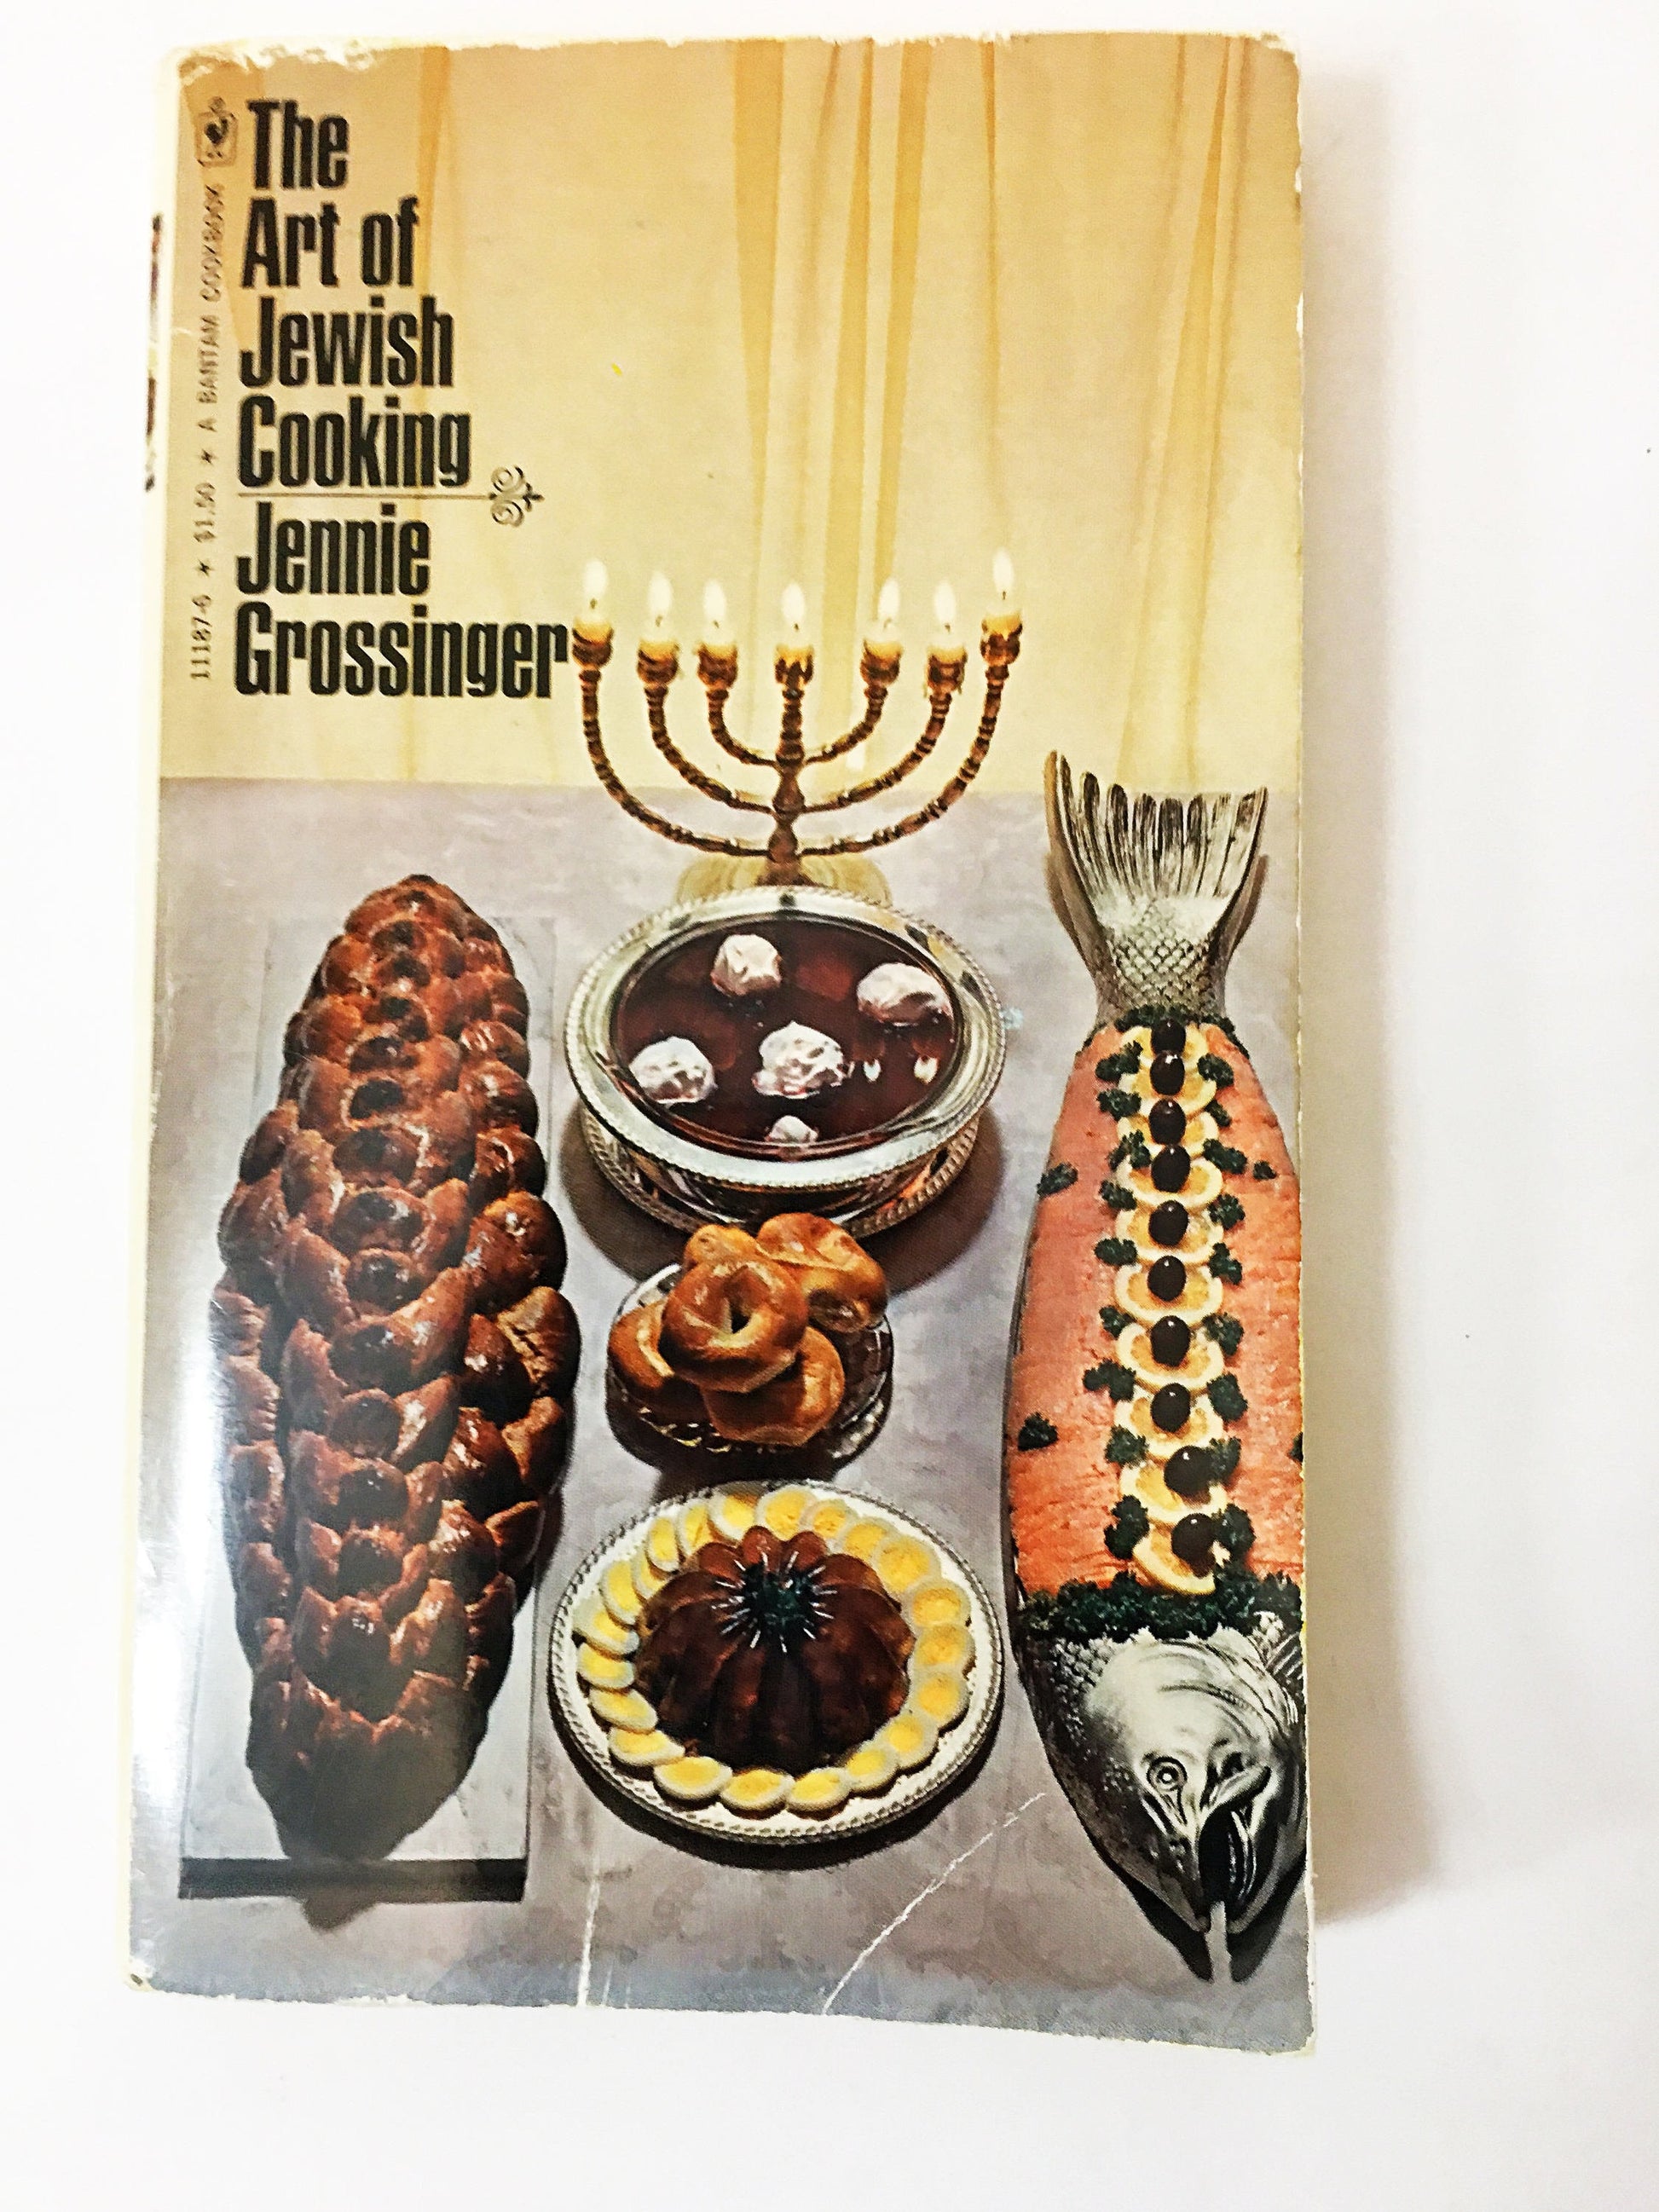 The Art of Jewish Cooking. Jennie Grossinger. Vintage cookbook circa 1977. classic and favorite Jewish recipes. Rosh Hashanah